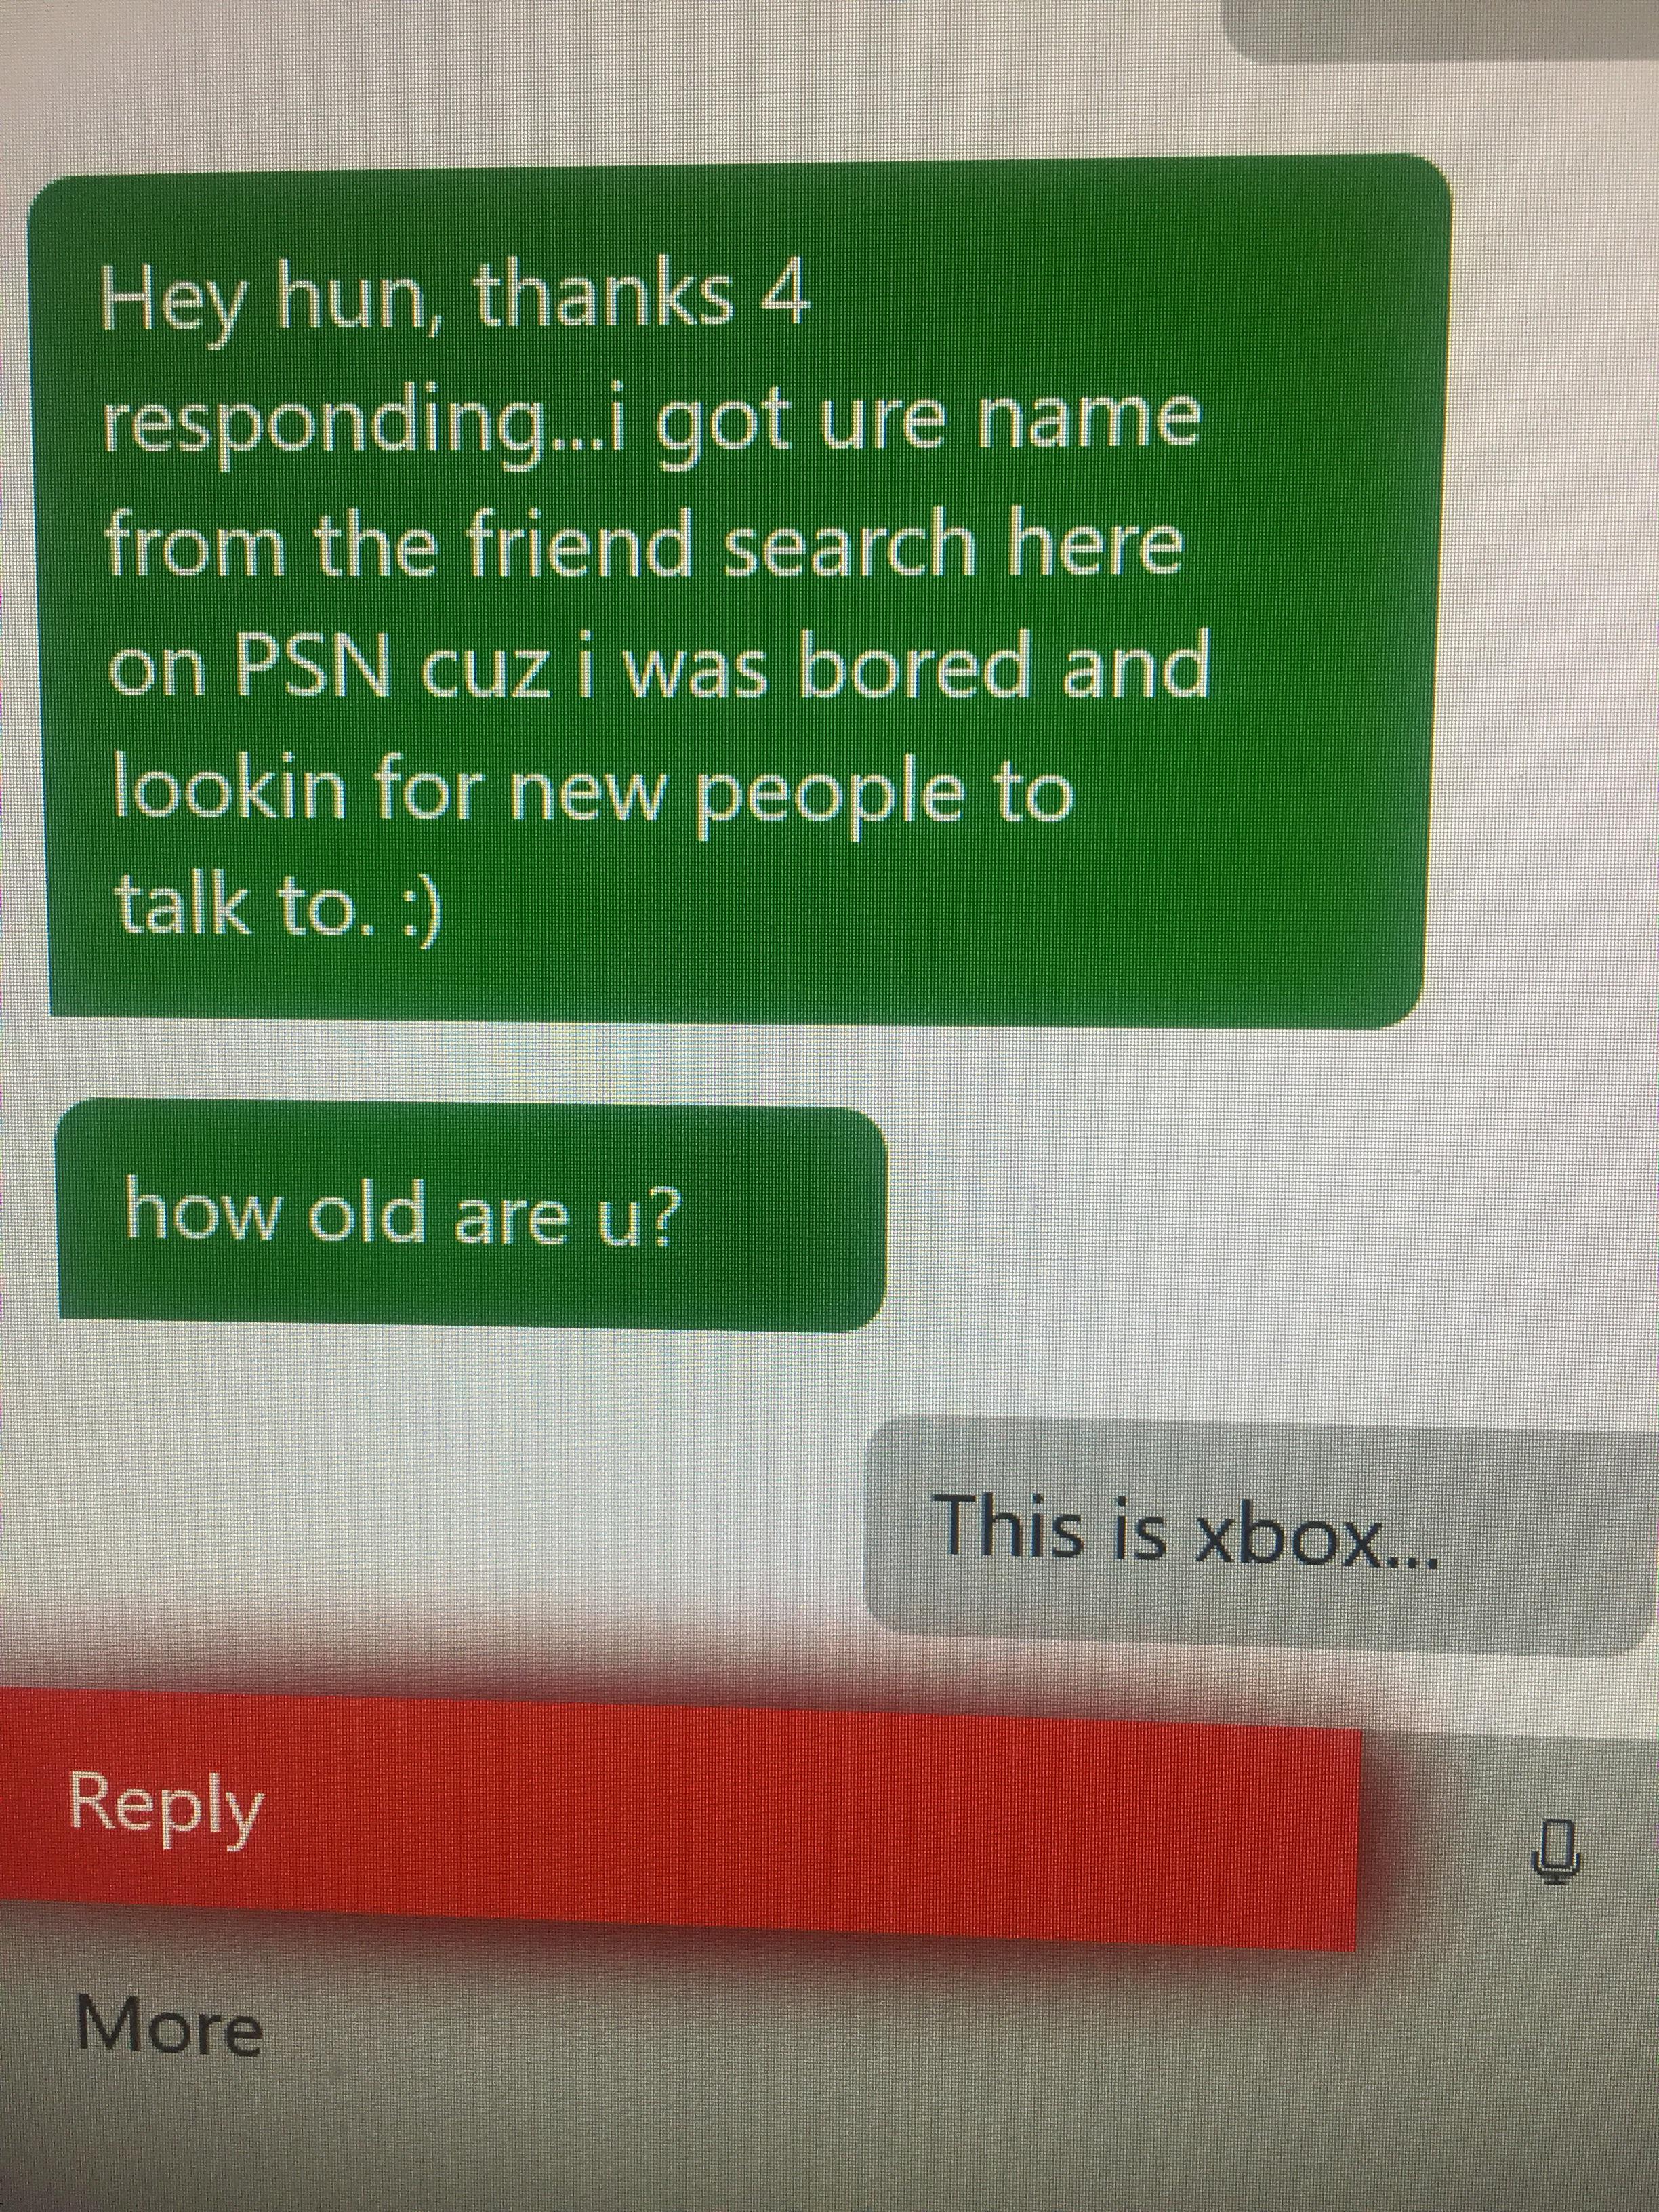 material - Hey hun, thanks 4 responding.. i got ure name from the friend search here on Psn cuz i was bored and lookin for new people to talk to. how old are u? This is xbox... More